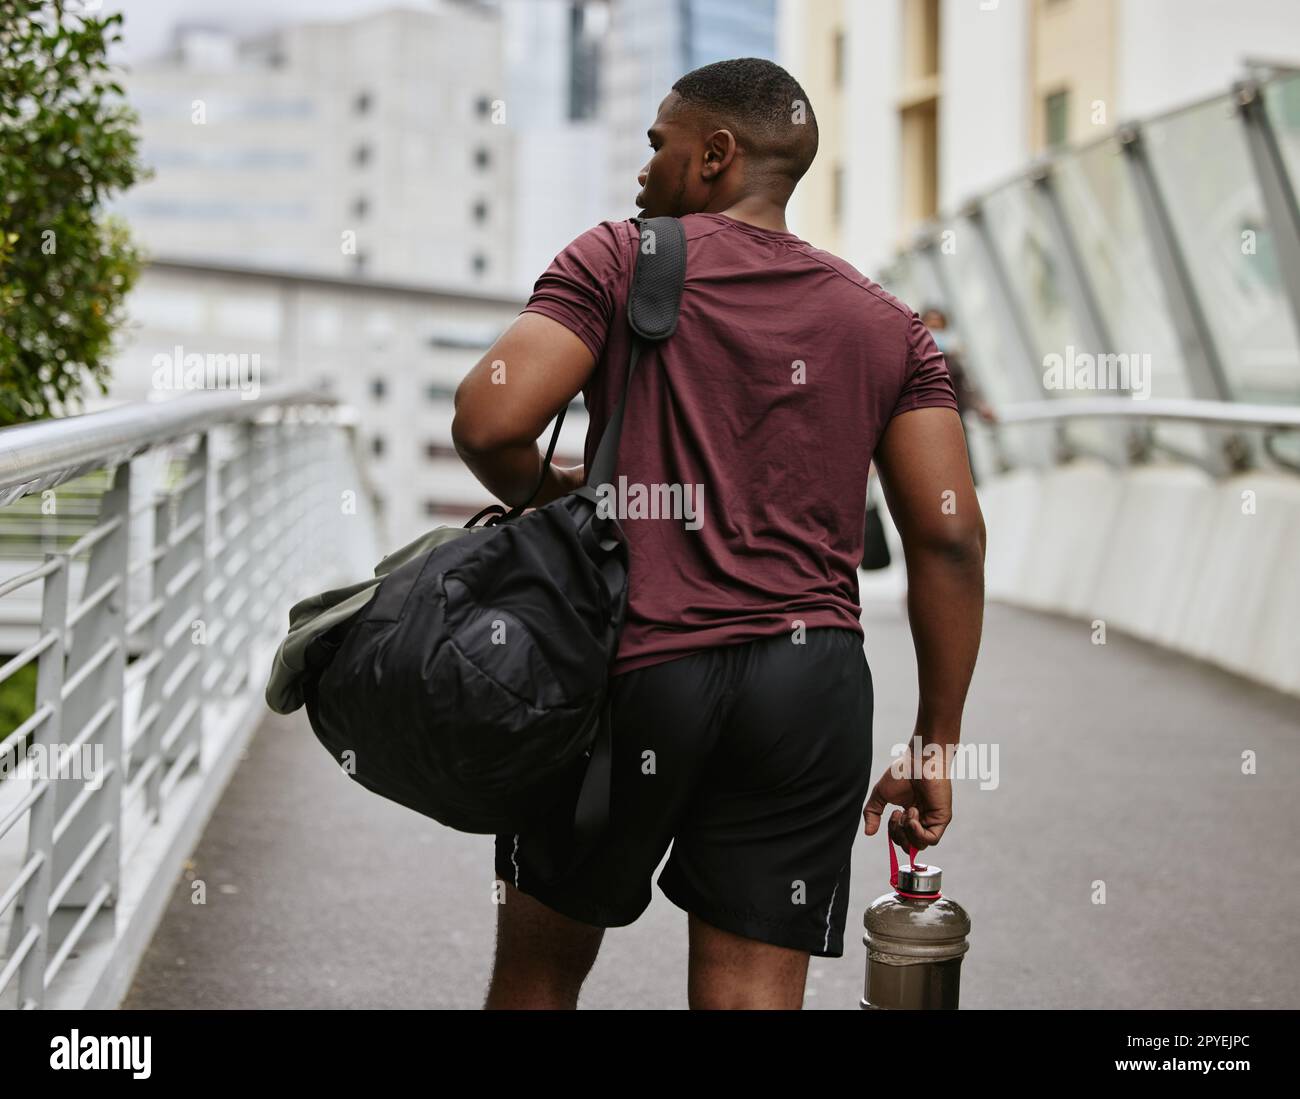 Black man, back or fitness bag on city bridge, road or street with workout gear, training water bottle or exercise kit. Runner, sports athlete or personal trainer in urban travel to gym for wellness Stock Photo